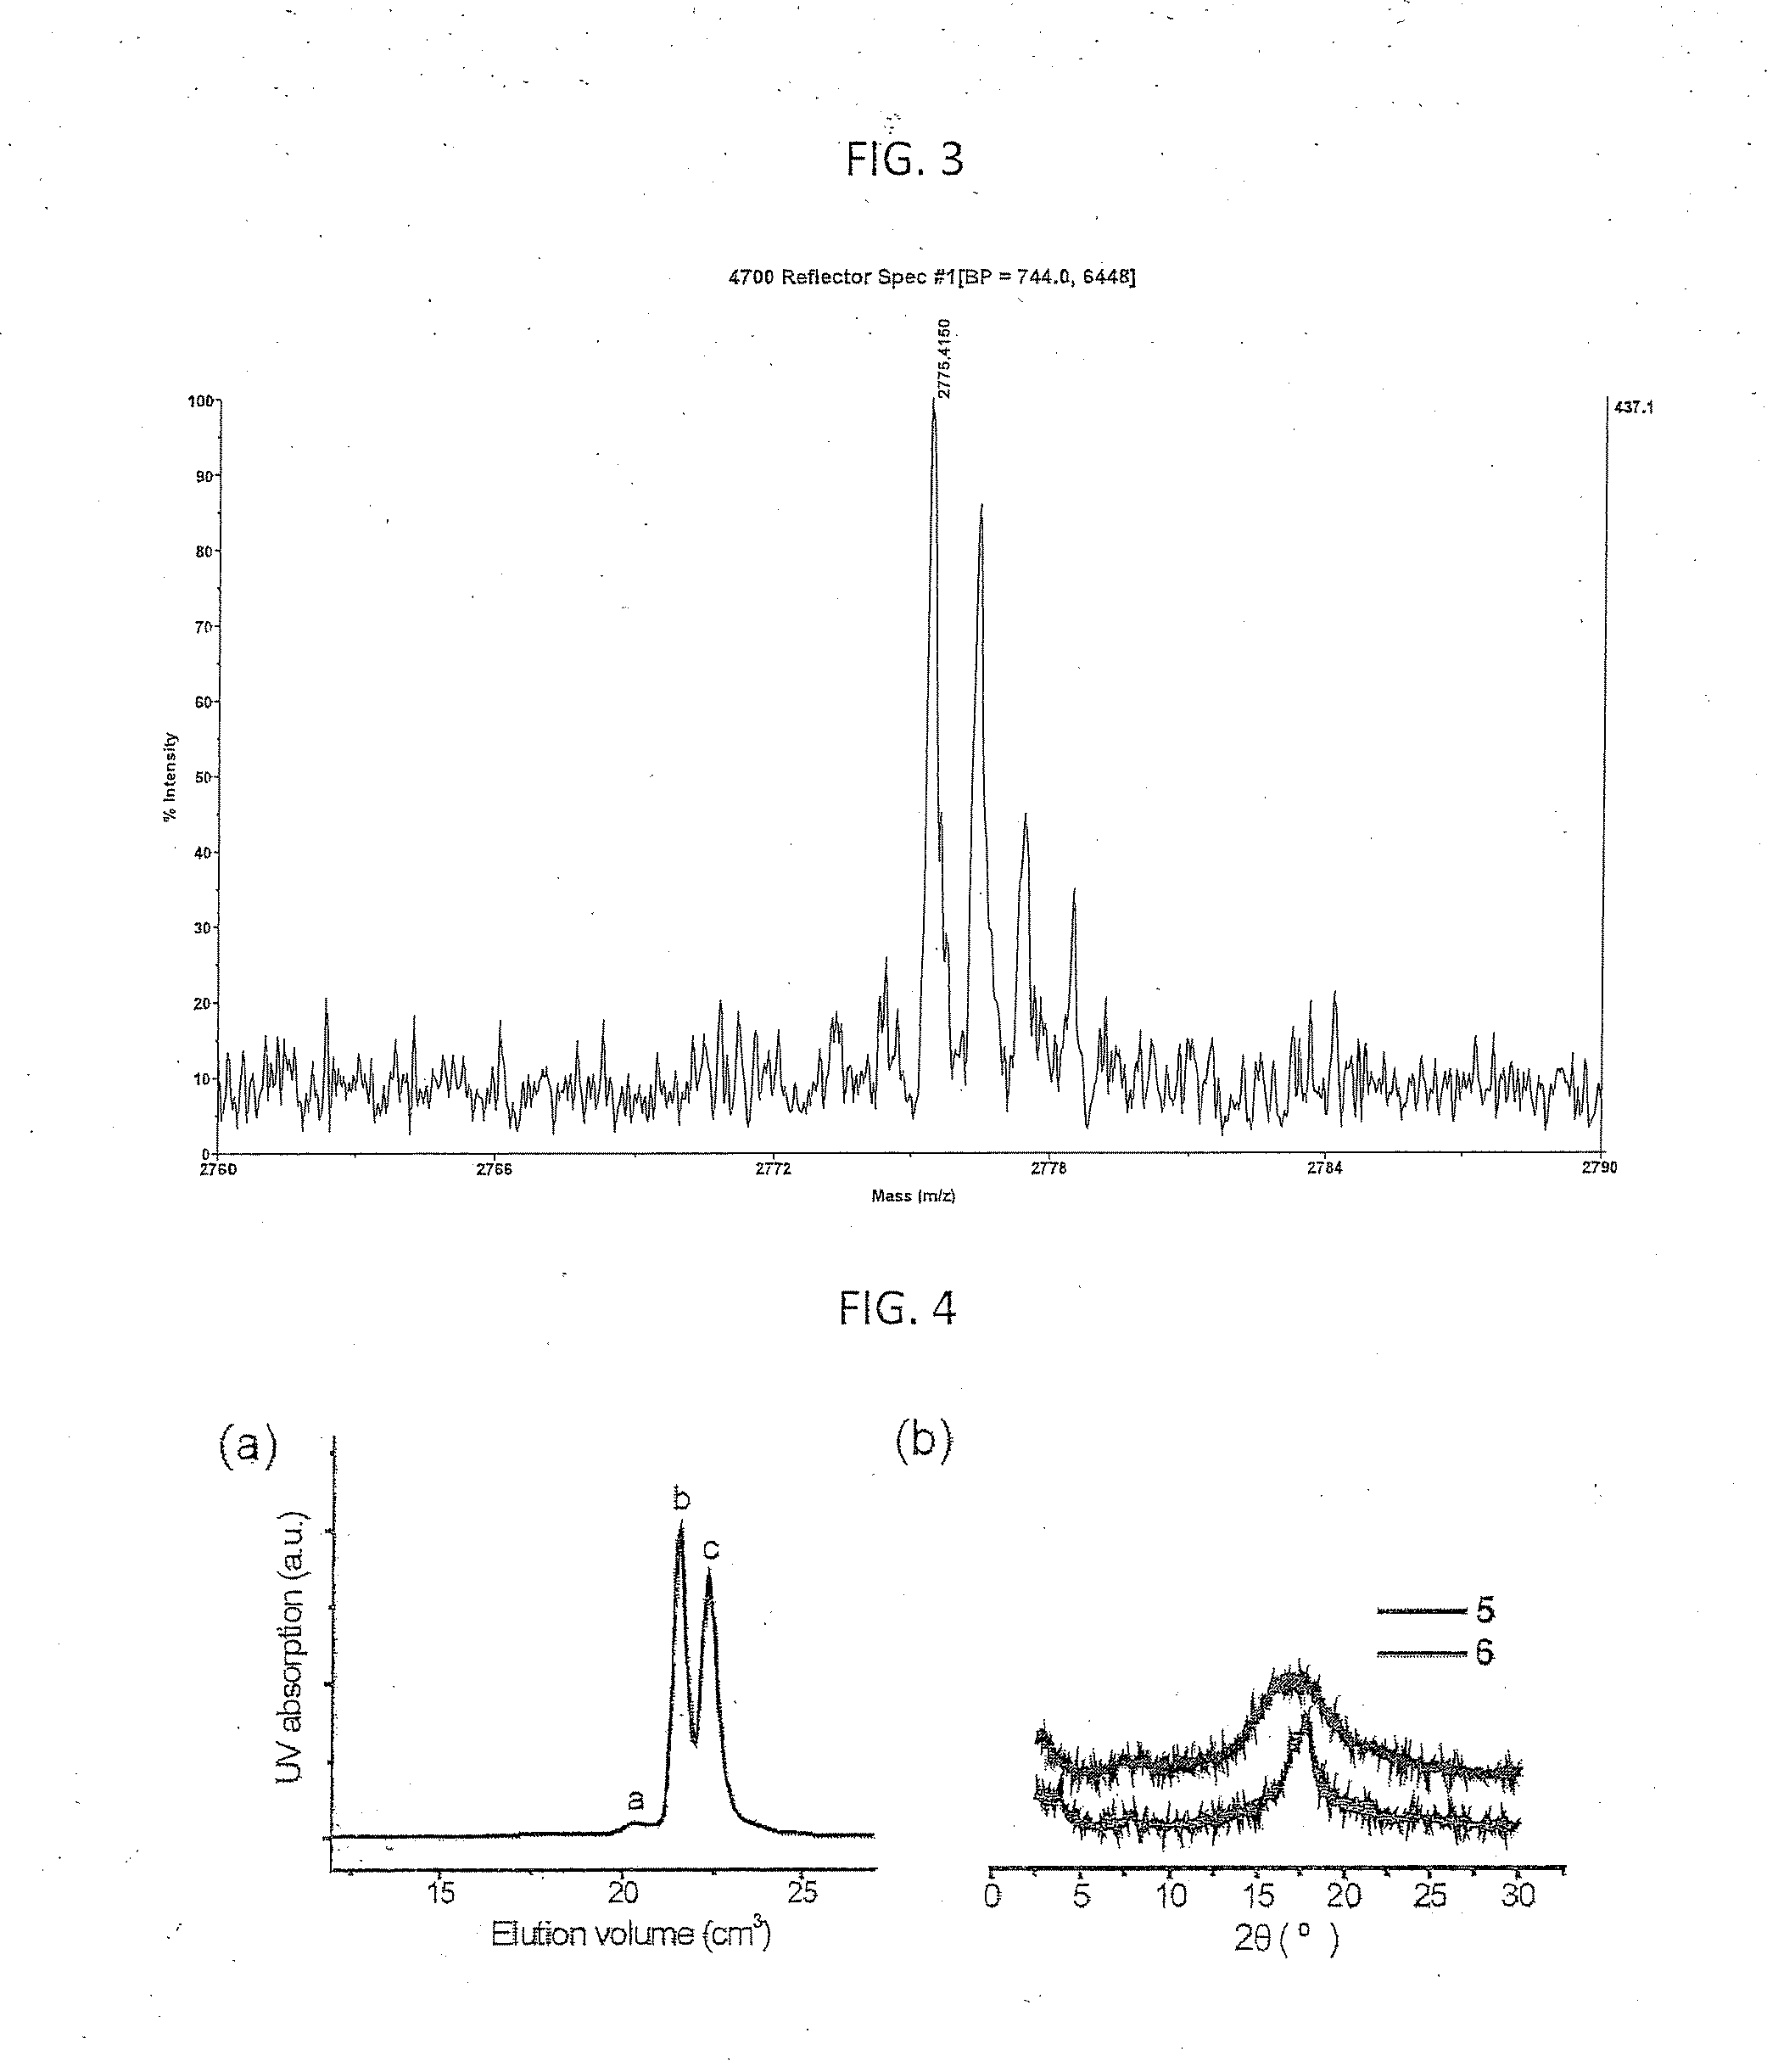 Orthogonal Procesing of Organic Materials Used in Electronic and Electrical Devices